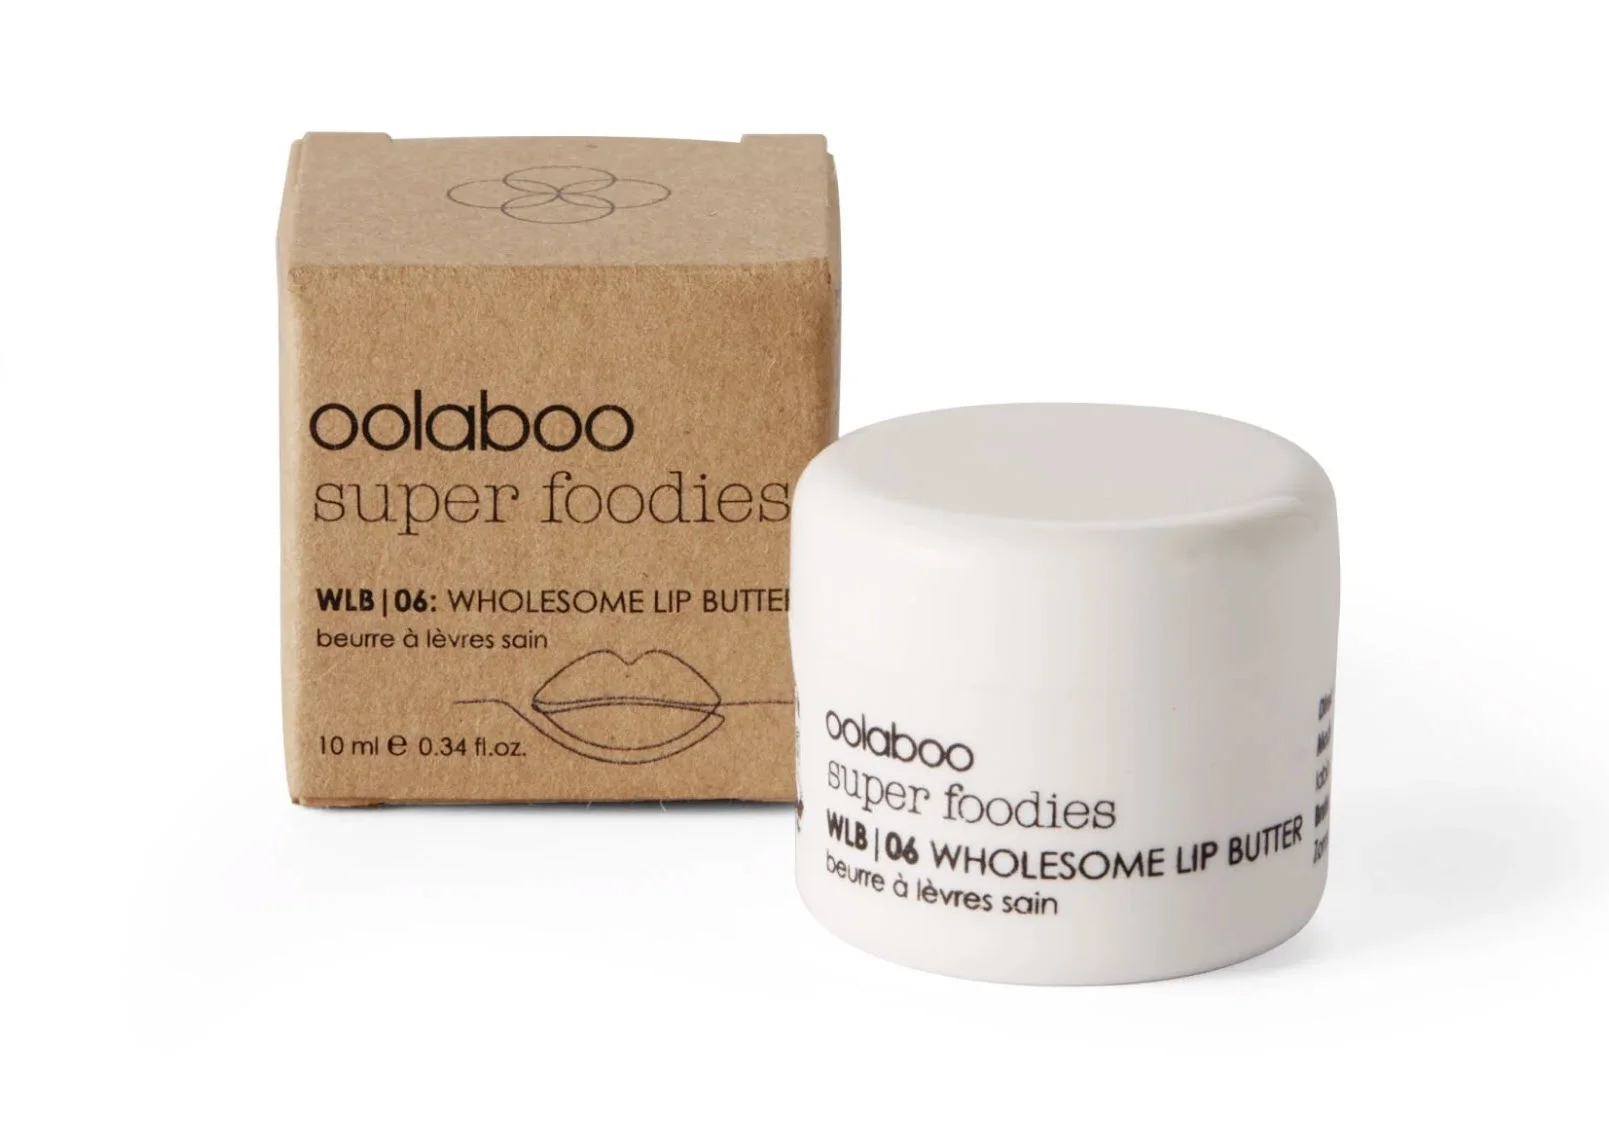 super foodies wholesome lip butter 10 ml